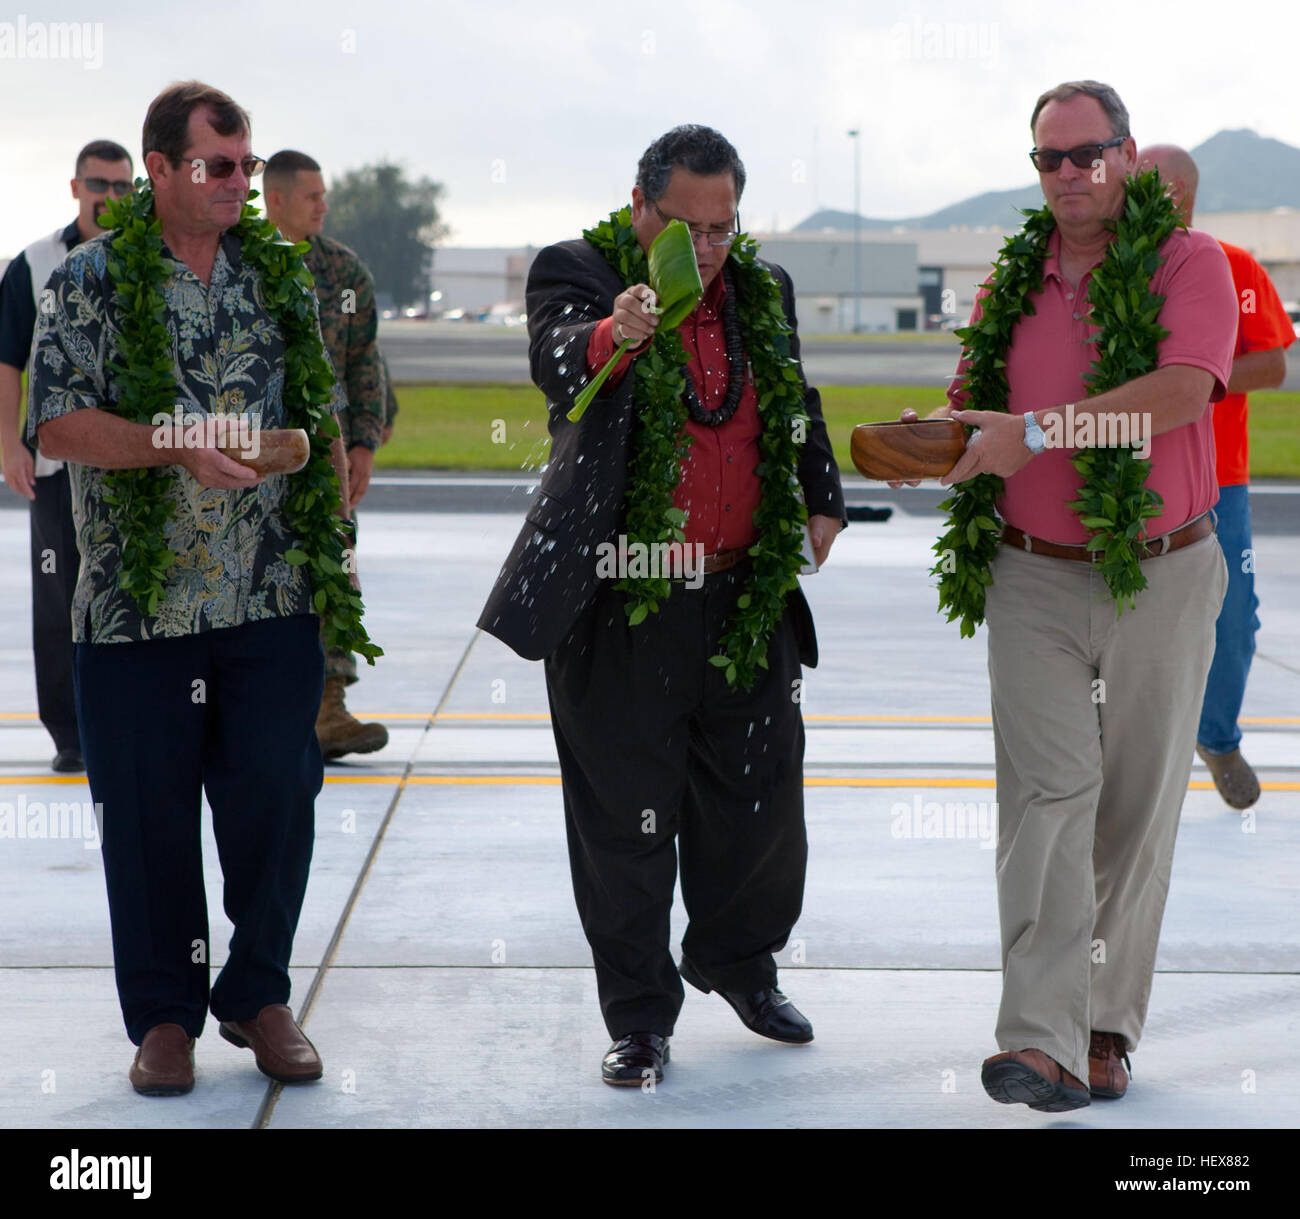 Pastor Kelekona Bishaw of Real Life Christian Center blesses the completed construction on Marine Corps Air Station Kaneohe Bay’s Feb. 15. The runway on Maj. Gen. Marion Eugene Carl Field reopened after two months of construction. MCAS runway reopens DVIDS367709 Stock Photo